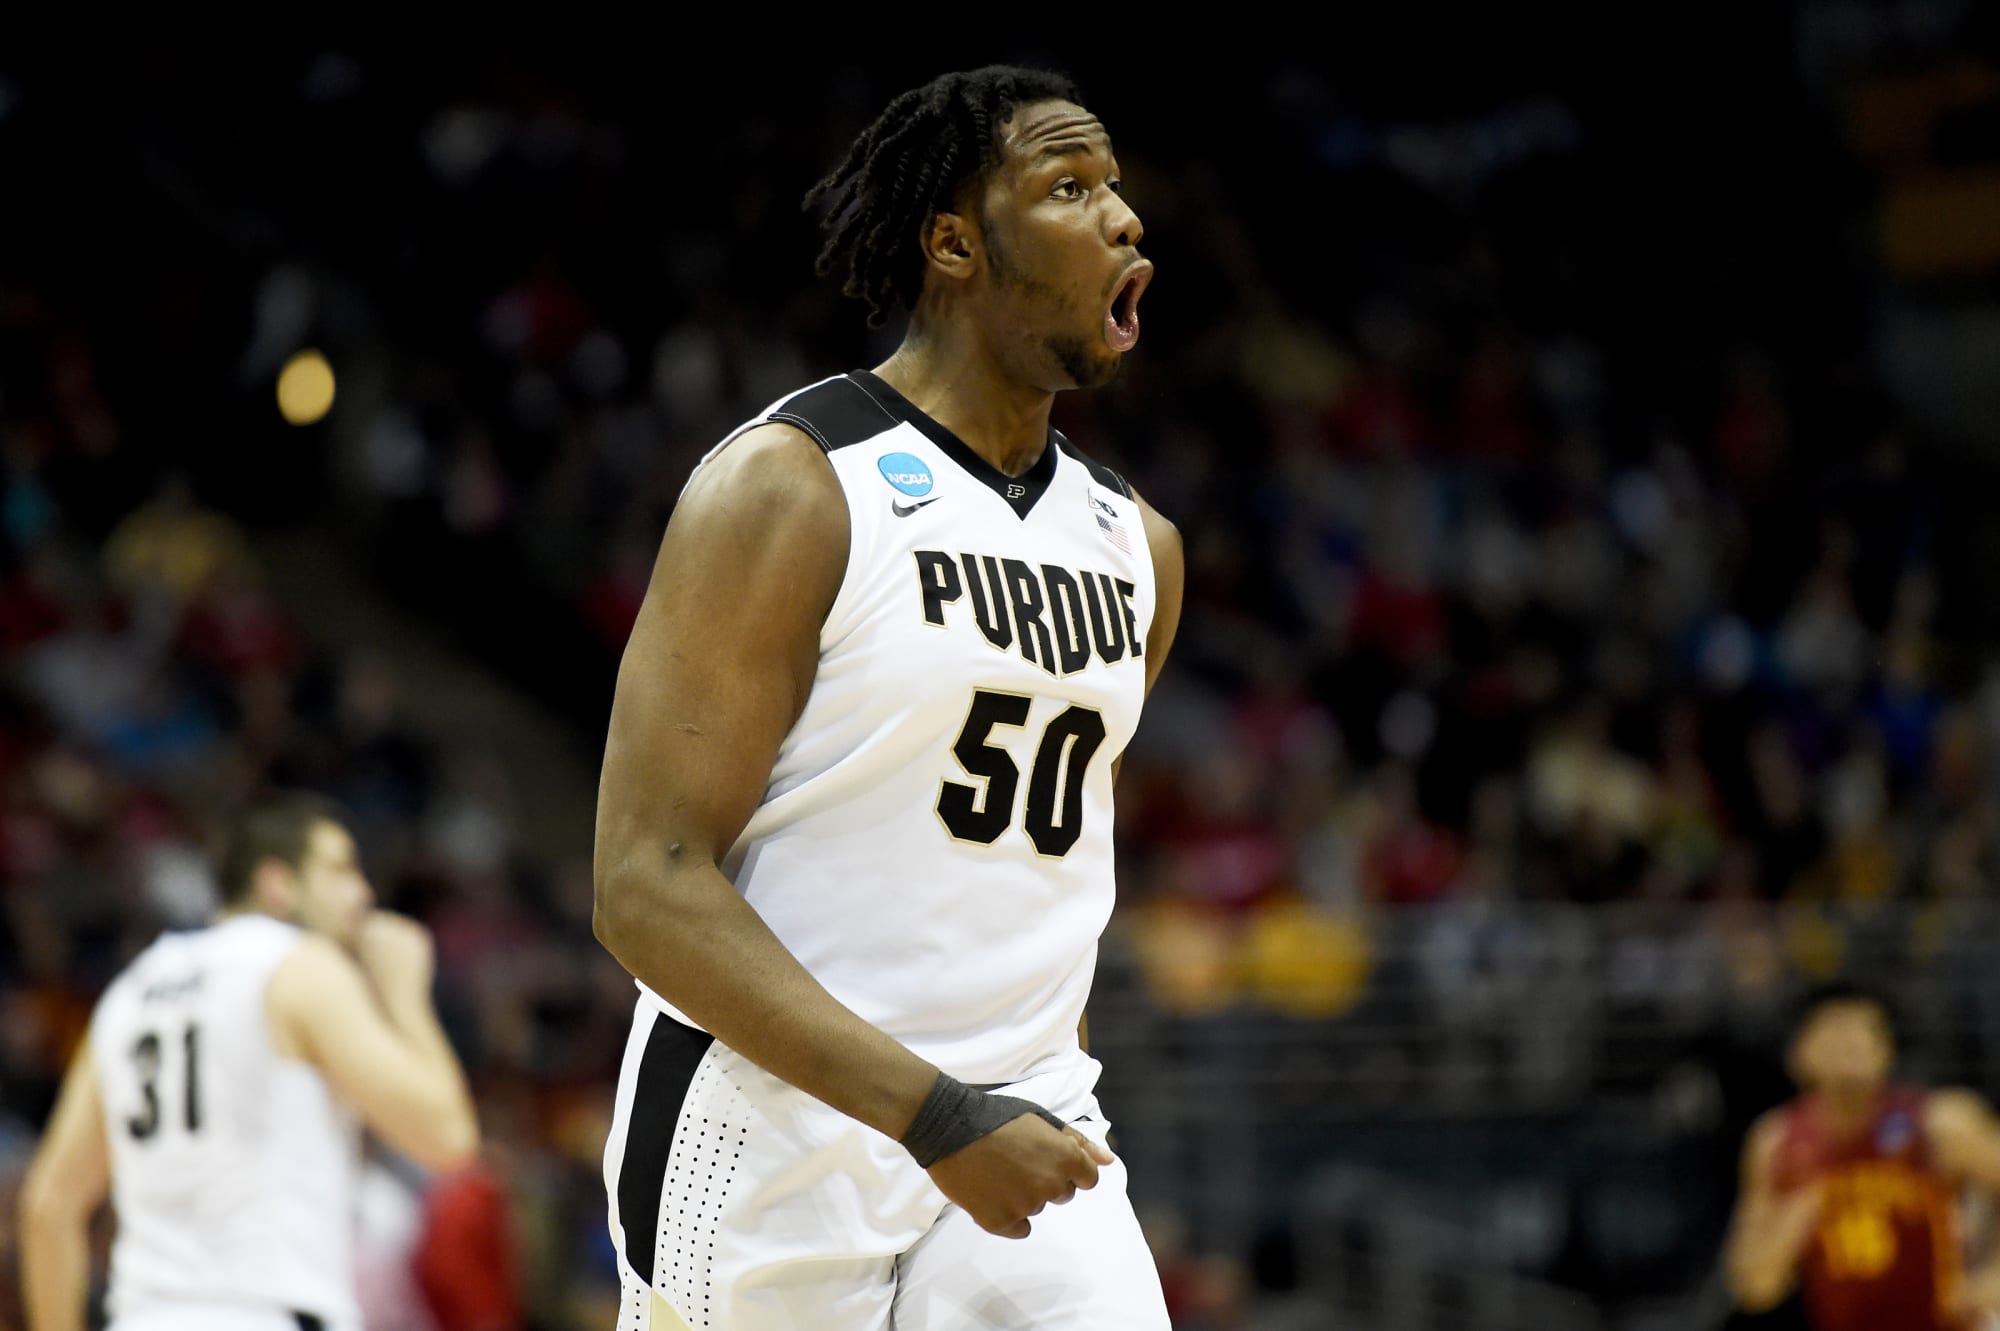 Former Purdue basketball famous person Caleb Swanigan useless at 25